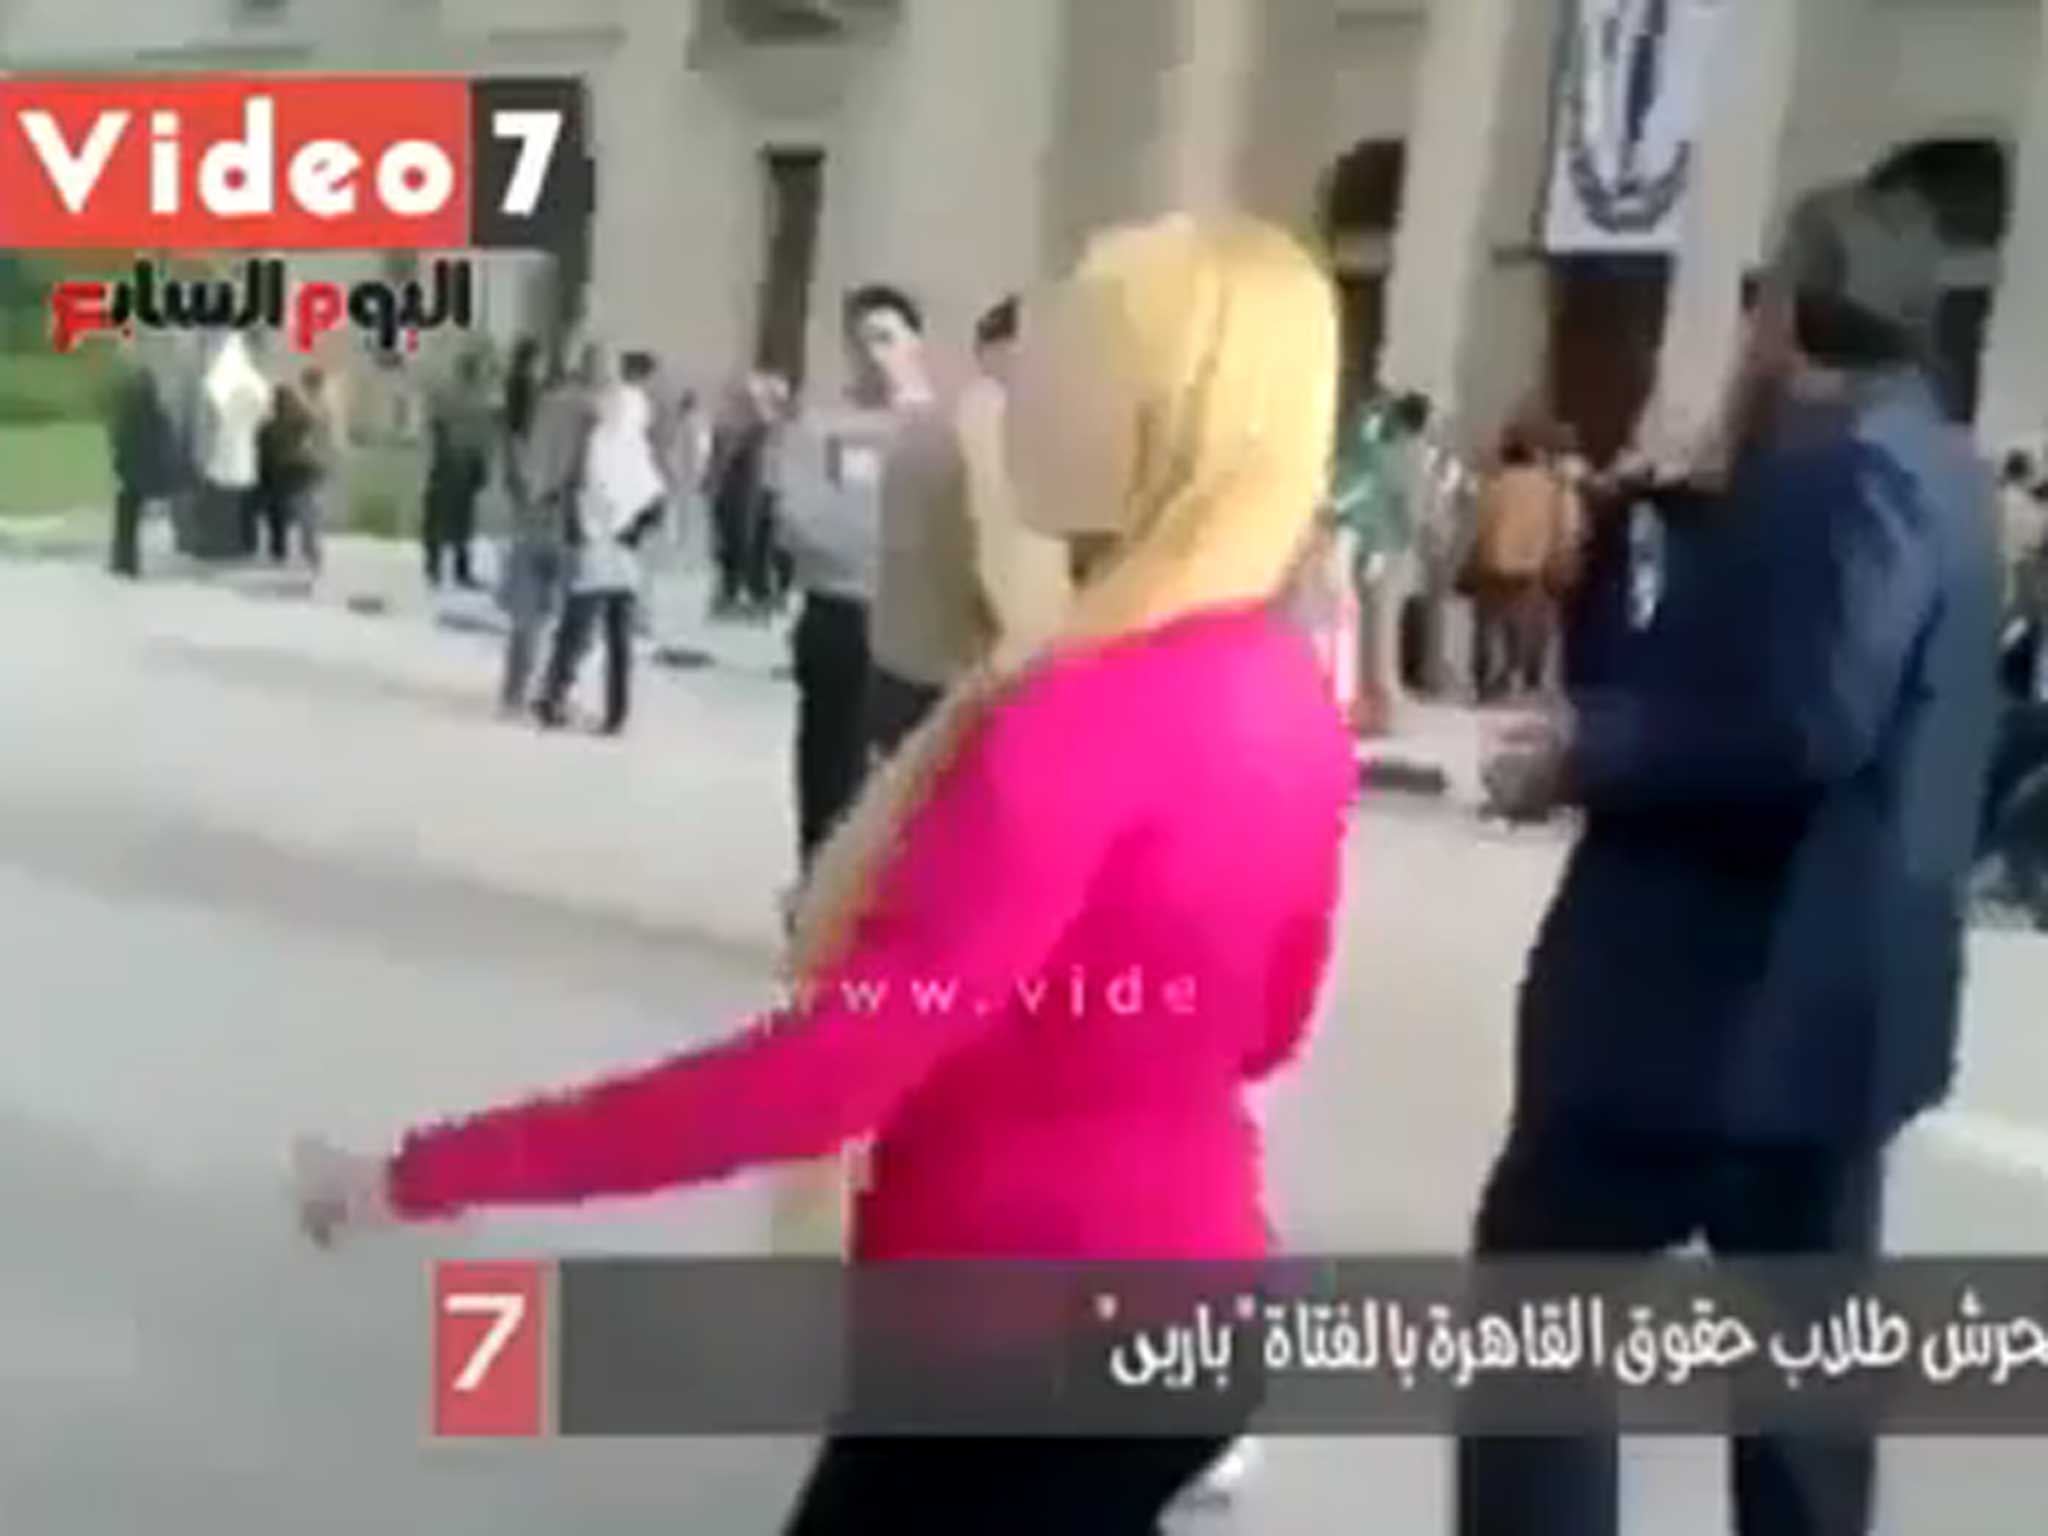 The woman was quickly surrounded by men as she walked through Cairo University campus